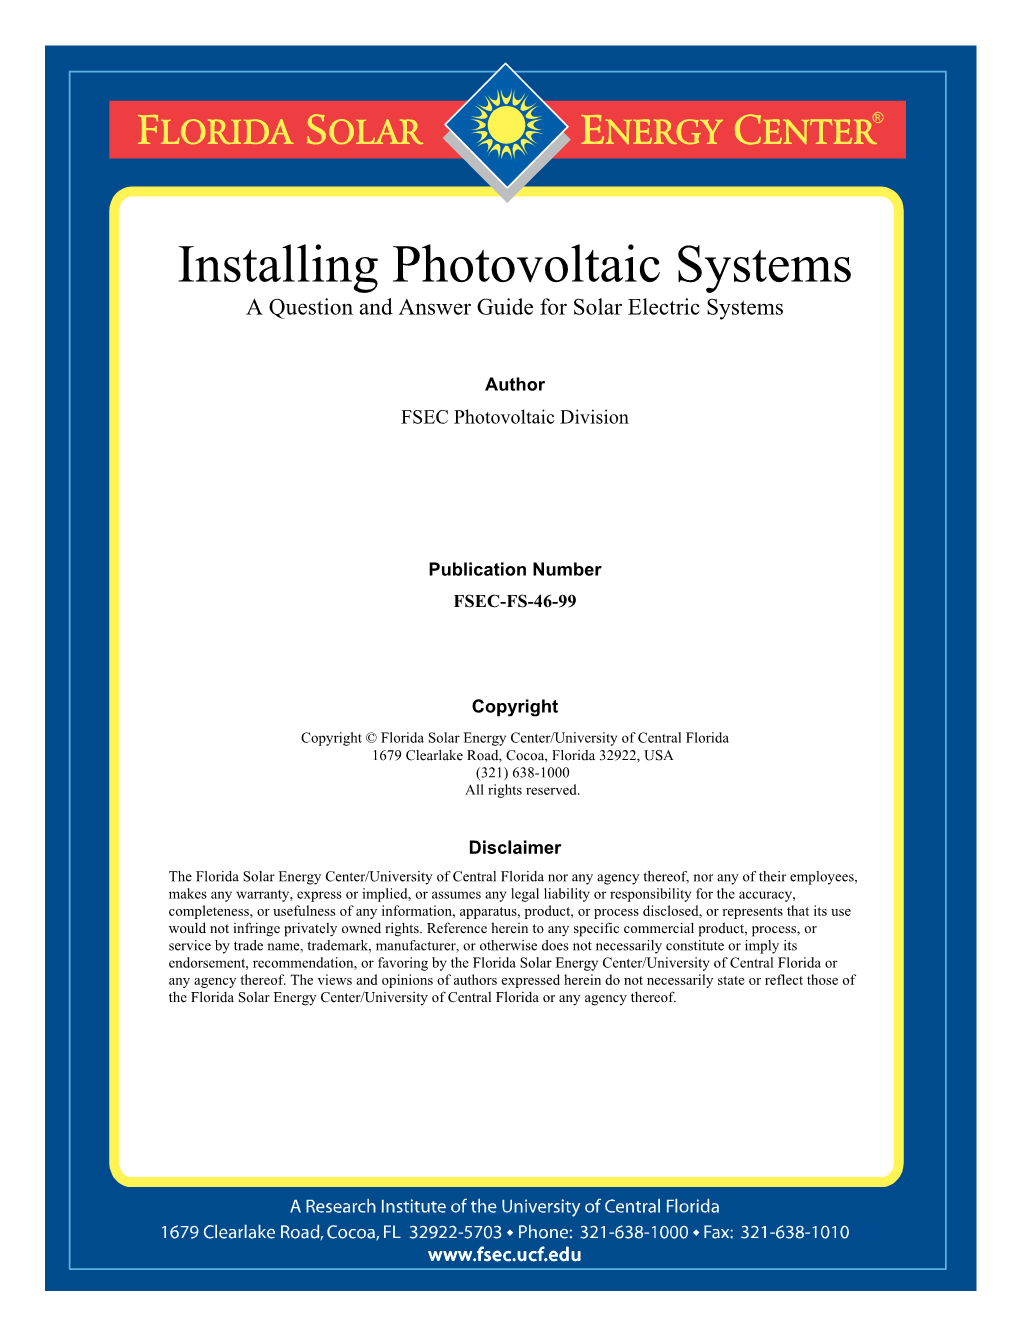 Installing Photovoltaic Systems a Question and Answer Guide for Solar Electric Systems